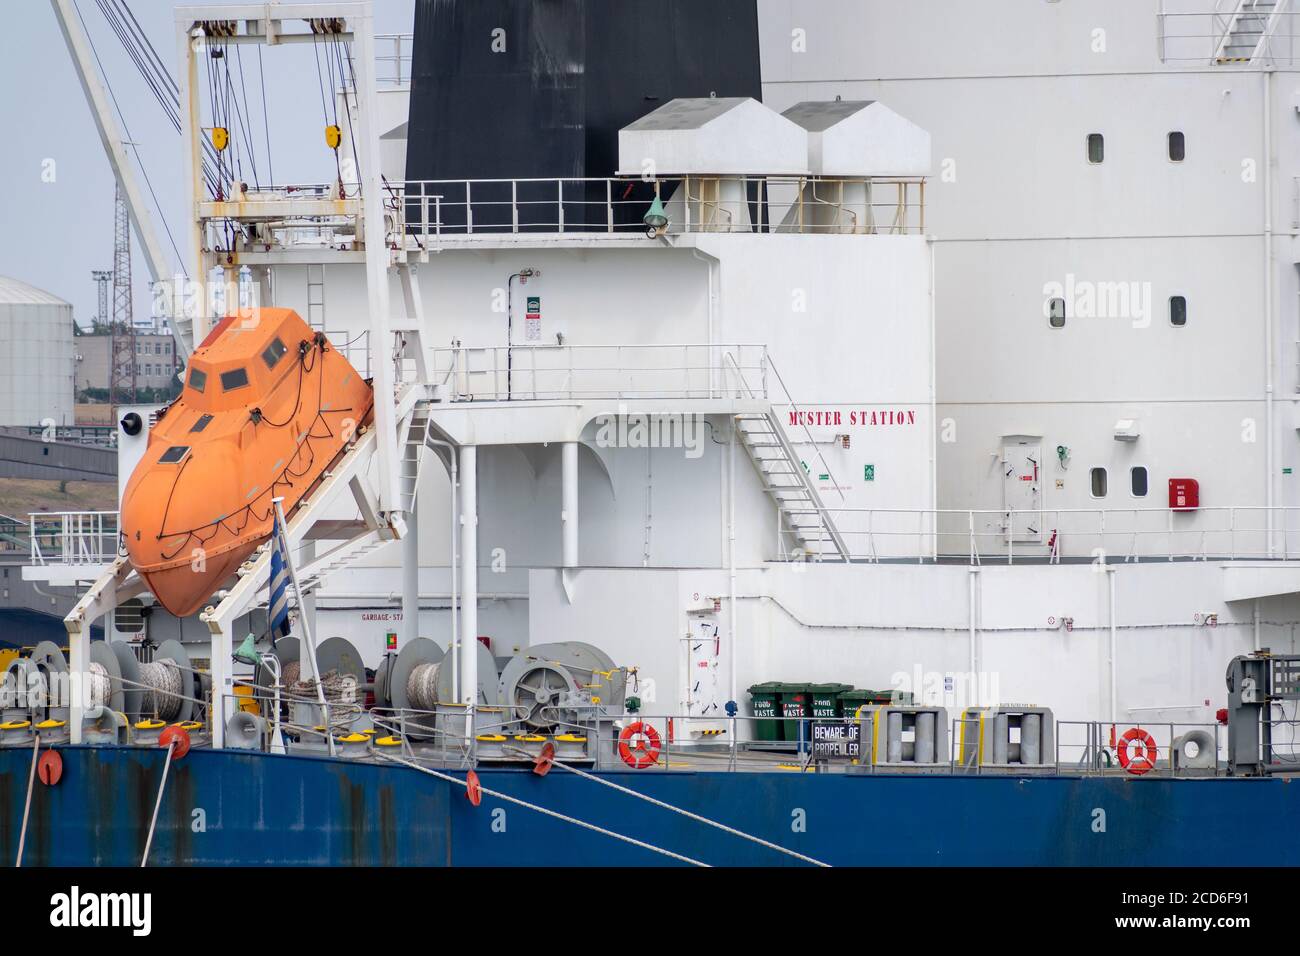 Lifeboat survival capsule on the cargo ship Stock Photo